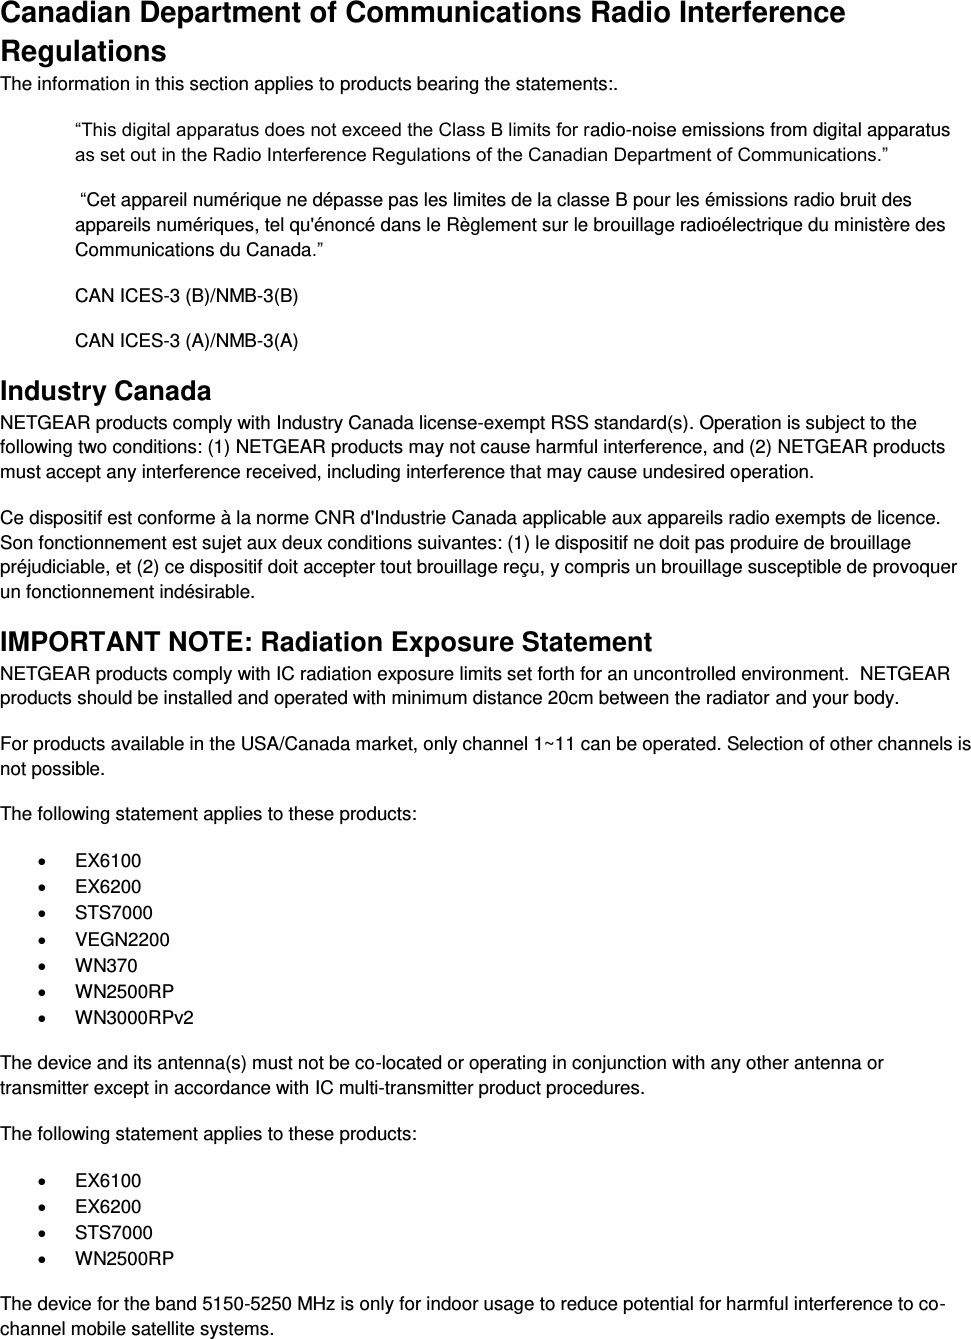  Canadian Department of Communications Radio Interference Regulations The information in this section applies to products bearing the statements:. “This digital apparatus does not exceed the Class B limits for radio-noise emissions from digital apparatus as set out in the Radio Interference Regulations of the Canadian Department of Communications.”  “Cet appareil numérique ne dépasse pas les limites de la classe B pour les émissions radio bruit des            appareils numériques, tel qu&apos;énoncé dans le Règlement sur le brouillage radioélectrique du ministère des Communications du Canada.” CAN ICES-3 (B)/NMB-3(B) CAN ICES-3 (A)/NMB-3(A) Industry Canada NETGEAR products comply with Industry Canada license-exempt RSS standard(s). Operation is subject to the following two conditions: (1) NETGEAR products may not cause harmful interference, and (2) NETGEAR products must accept any interference received, including interference that may cause undesired operation. Ce dispositif est conforme à la norme CNR d&apos;Industrie Canada applicable aux appareils radio exempts de licence. Son fonctionnement est sujet aux deux conditions suivantes: (1) le dispositif ne doit pas produire de brouillage préjudiciable, et (2) ce dispositif doit accepter tout brouillage reçu, y compris un brouillage susceptible de provoquer un fonctionnement indésirable. IMPORTANT NOTE: Radiation Exposure Statement NETGEAR products comply with IC radiation exposure limits set forth for an uncontrolled environment.  NETGEAR products should be installed and operated with minimum distance 20cm between the radiator and your body. For products available in the USA/Canada market, only channel 1~11 can be operated. Selection of other channels is not possible. The following statement applies to these products:   EX6100   EX6200   STS7000   VEGN2200   WN370   WN2500RP   WN3000RPv2 The device and its antenna(s) must not be co-located or operating in conjunction with any other antenna or transmitter except in accordance with IC multi-transmitter product procedures. The following statement applies to these products:   EX6100   EX6200   STS7000   WN2500RP The device for the band 5150-5250 MHz is only for indoor usage to reduce potential for harmful interference to co-channel mobile satellite systems. 